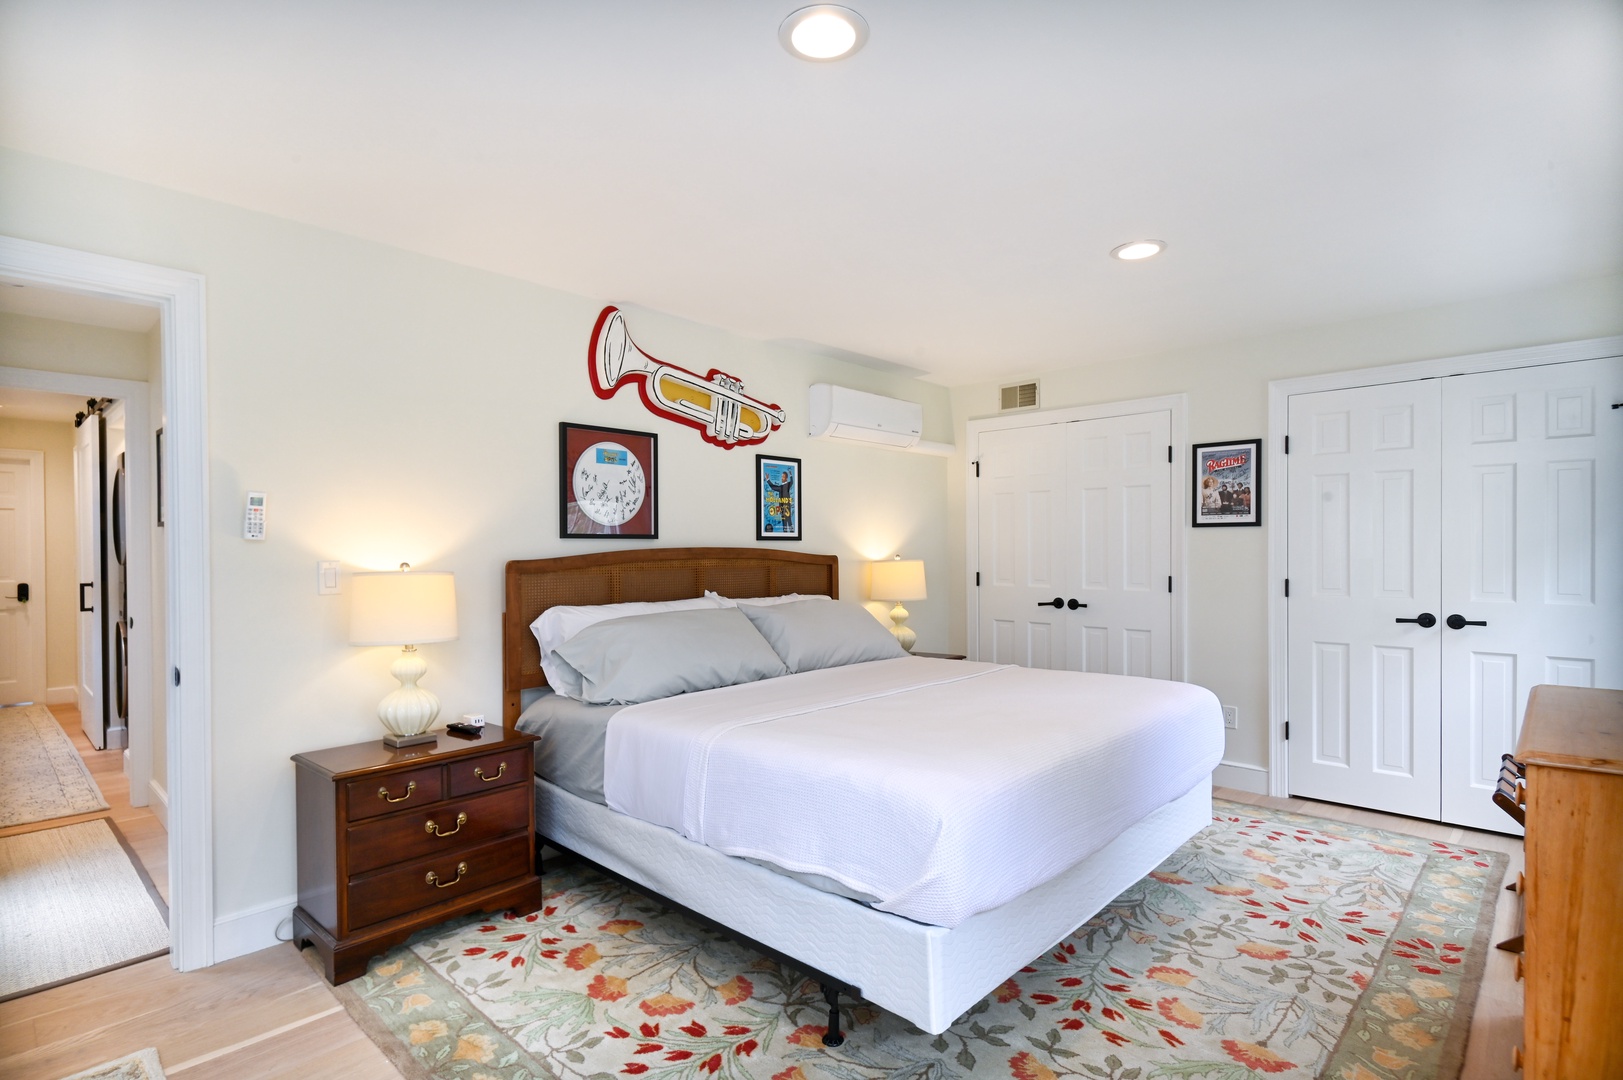 Playhouse’s chic king bedroom features a Smart TV & fantastic theater artwork